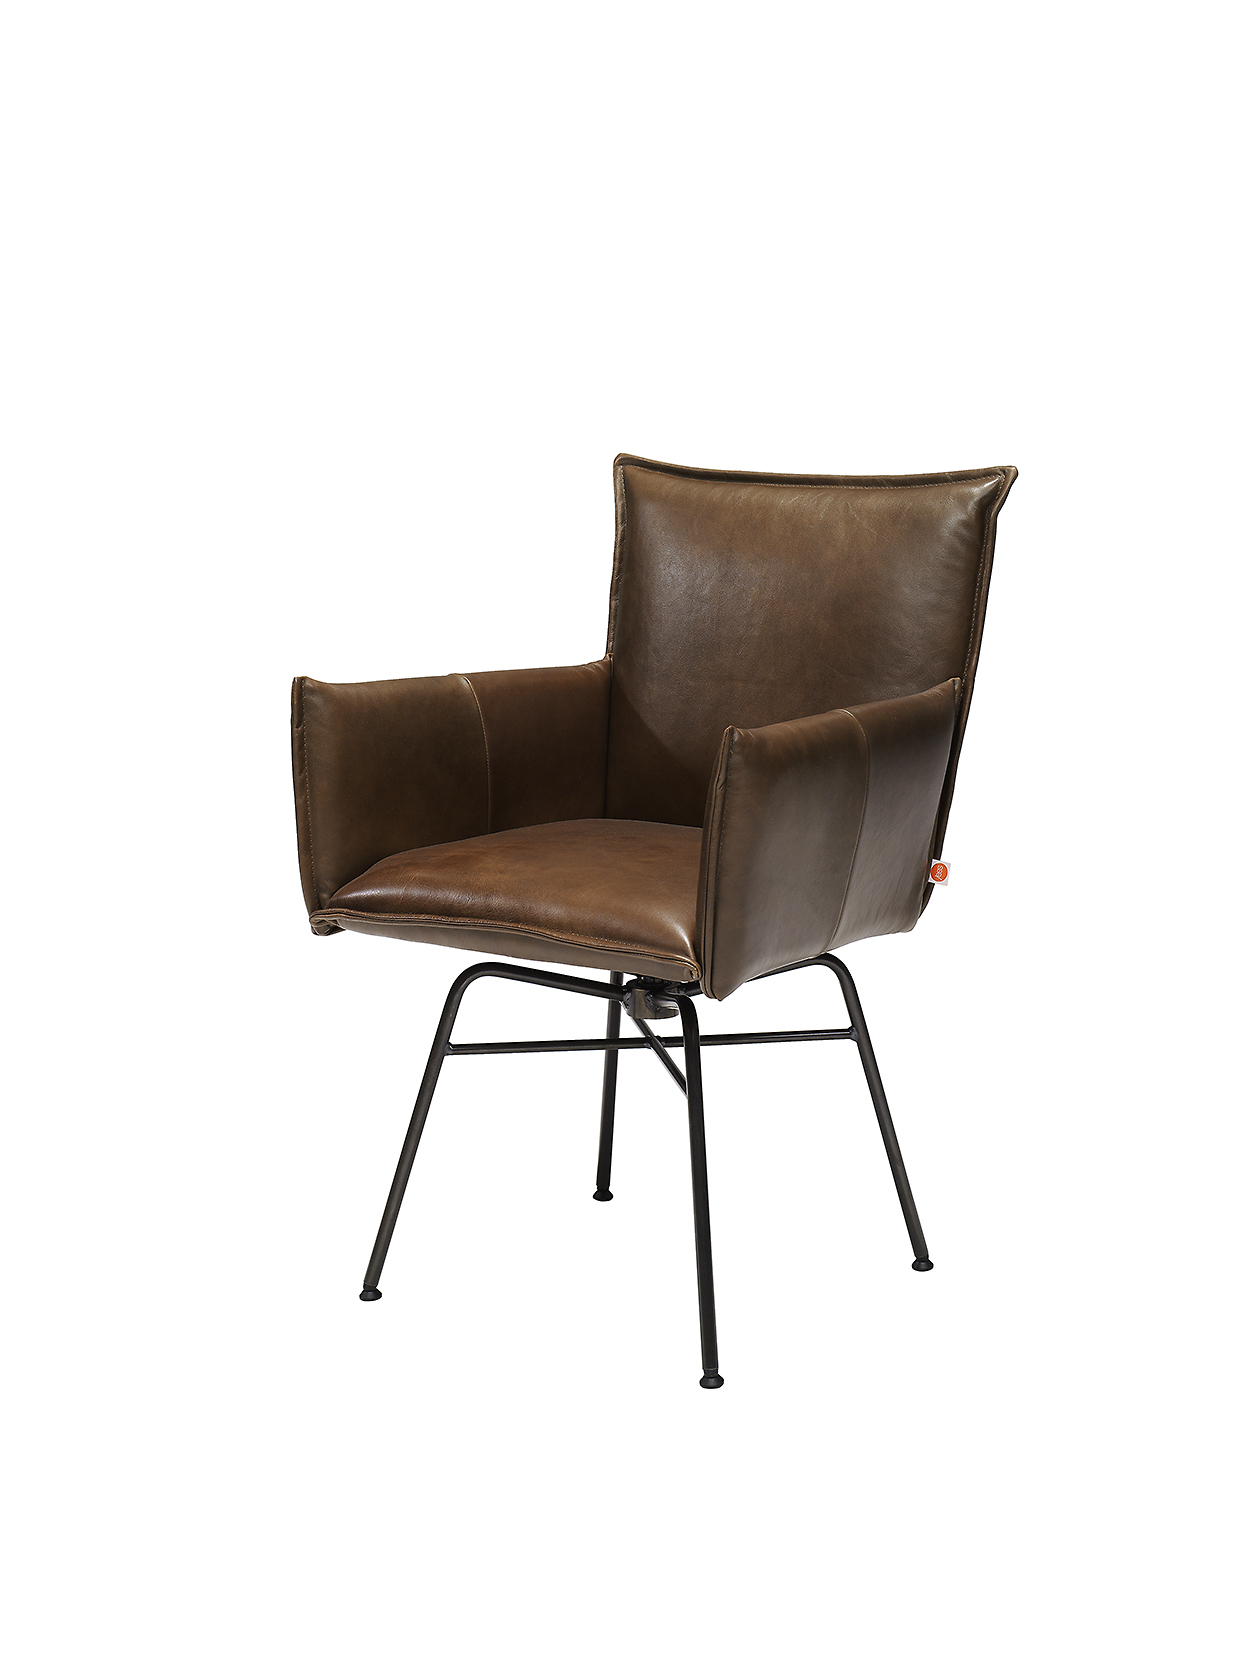 Sanne Swivel Chair With Arm Luxor Fango Pers LR ZS 8720153744652